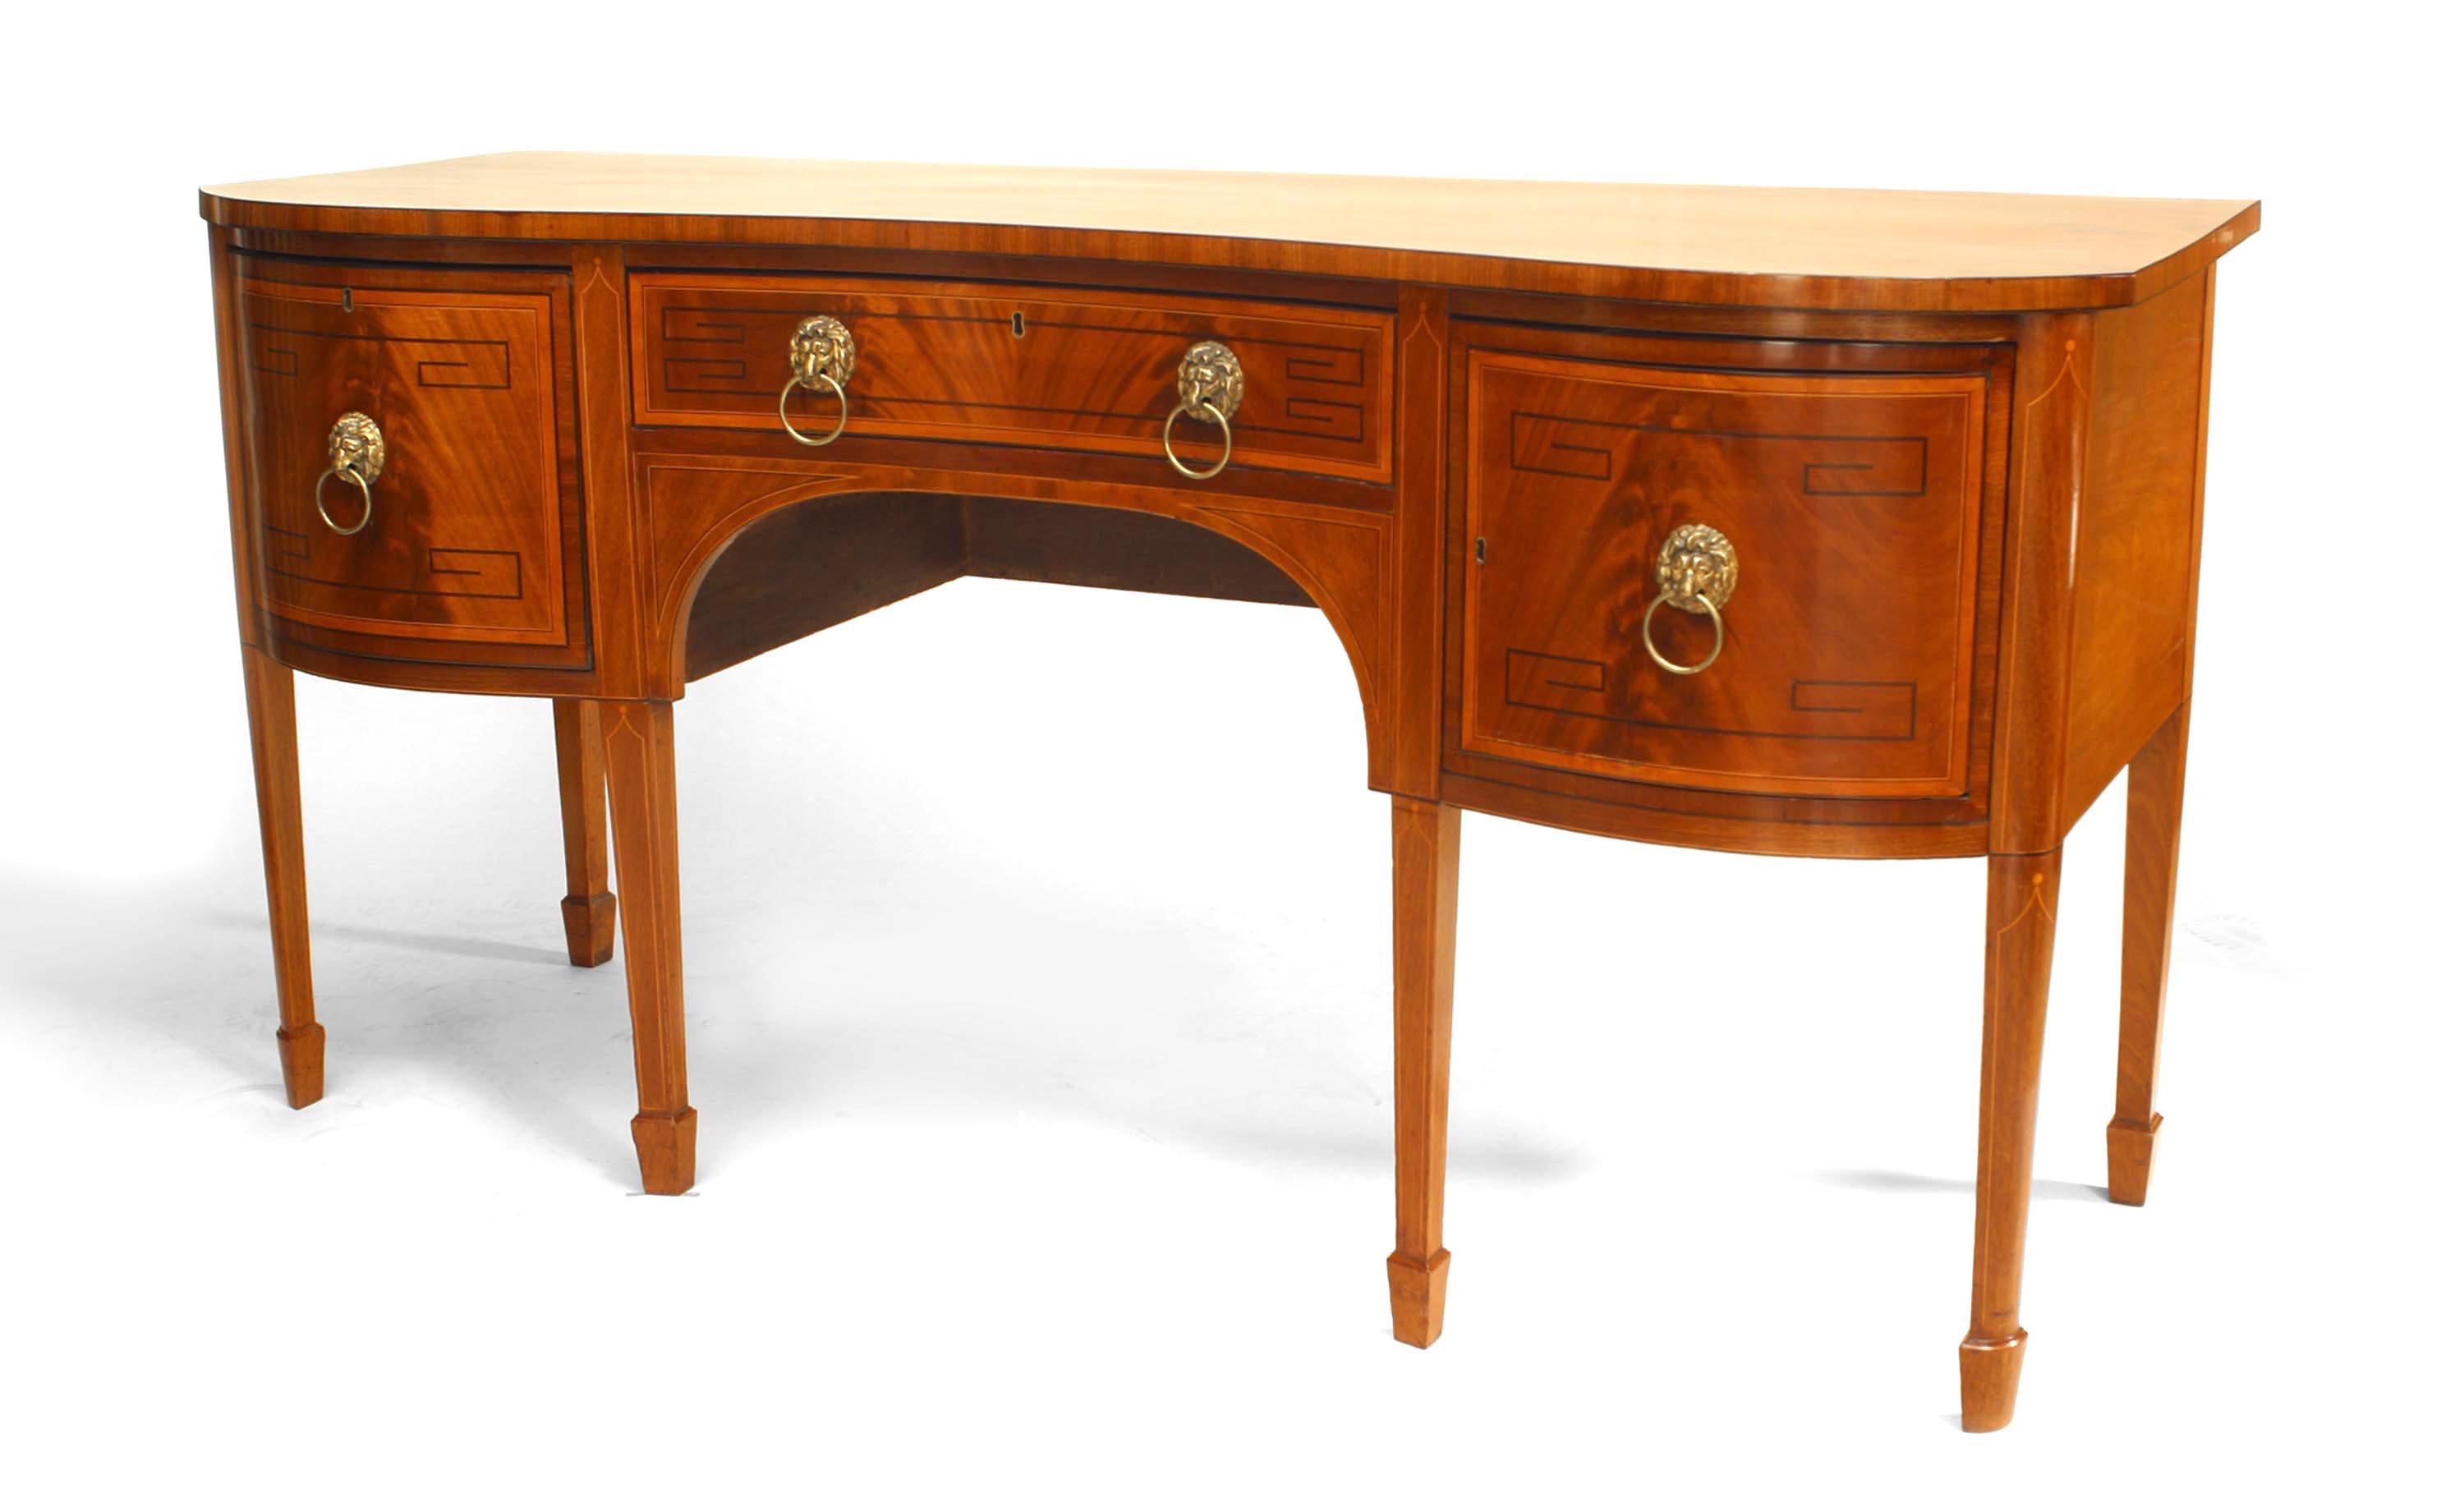 English Regency mahogany sideboard with double bow front design and banded inlay and ebonized Greek key design with brass lion head drawer handles with spade form feet.
